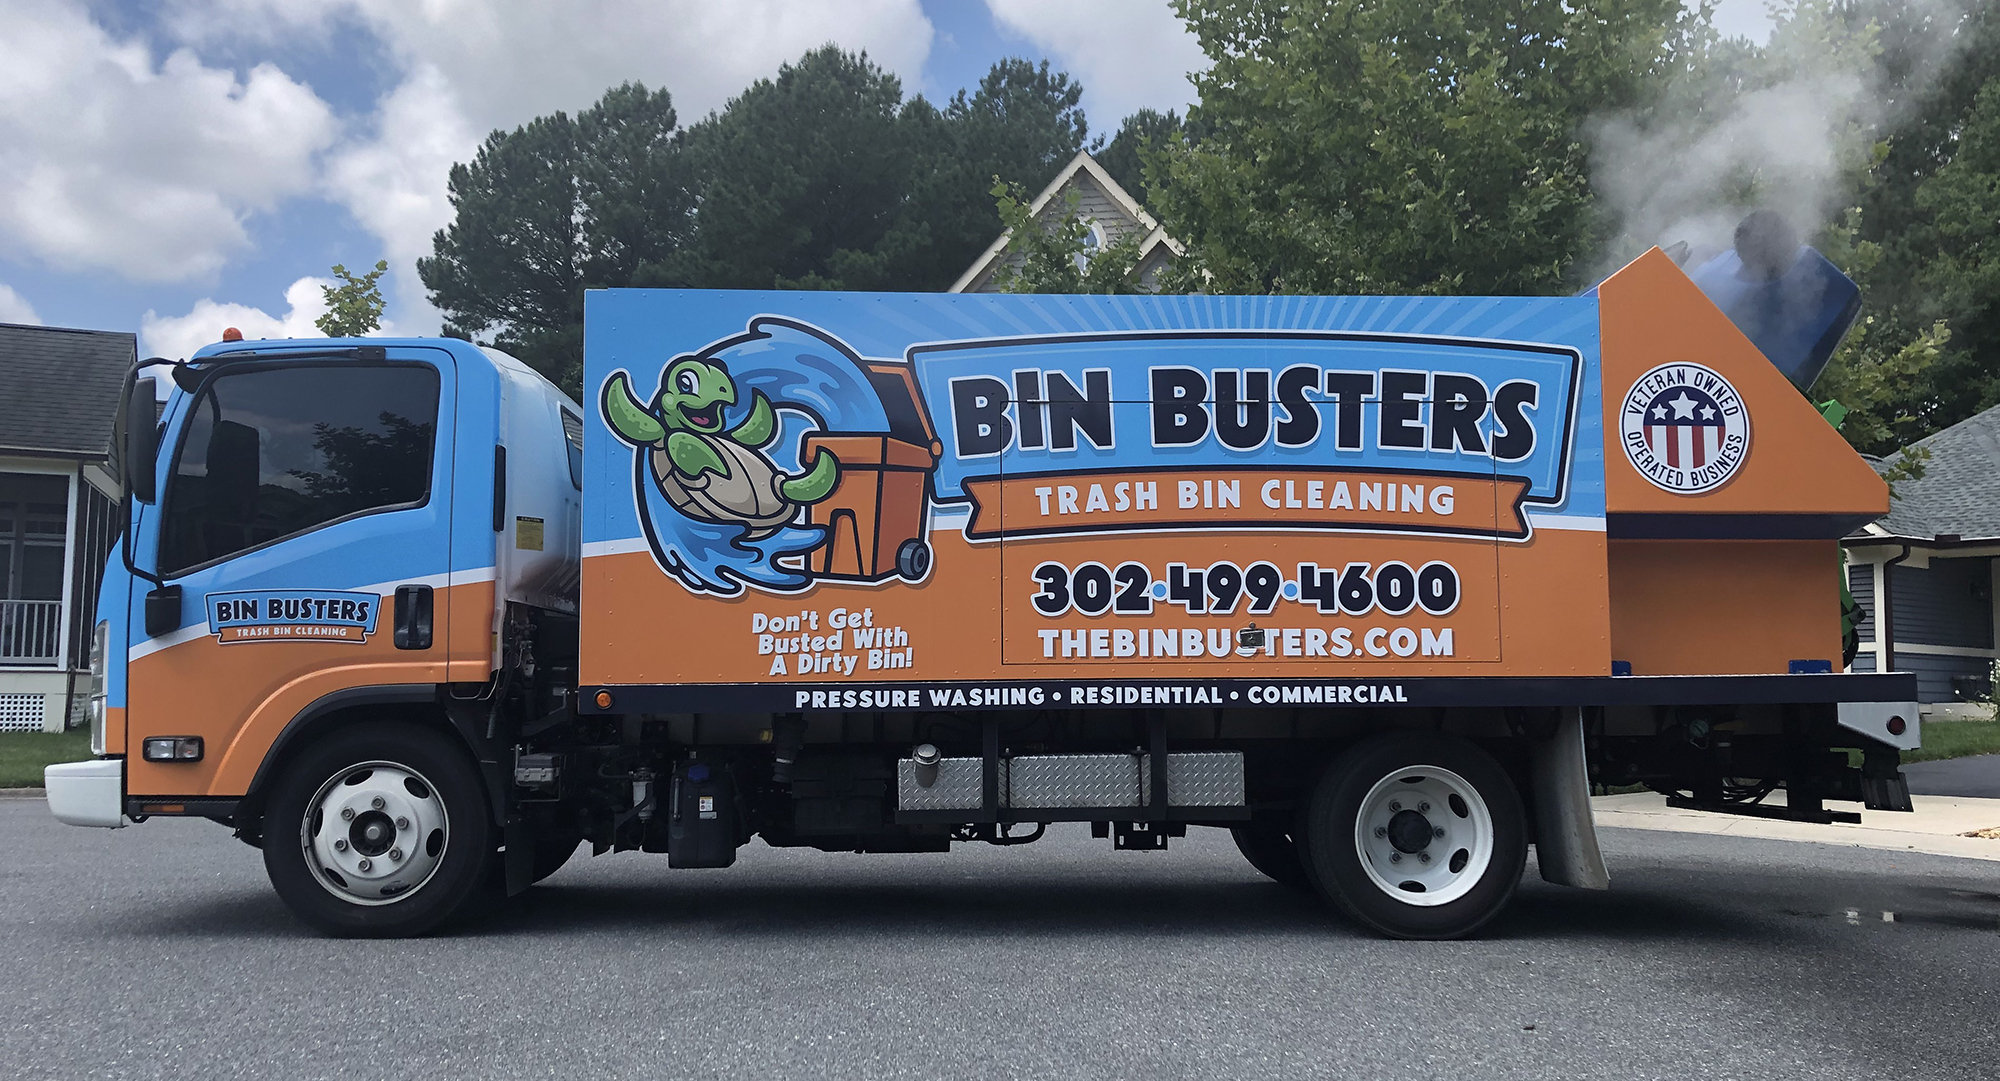 images/BIN_BUSTERS_DE_TRASH_CAN_CLEANING_SERVICES_2.jpg